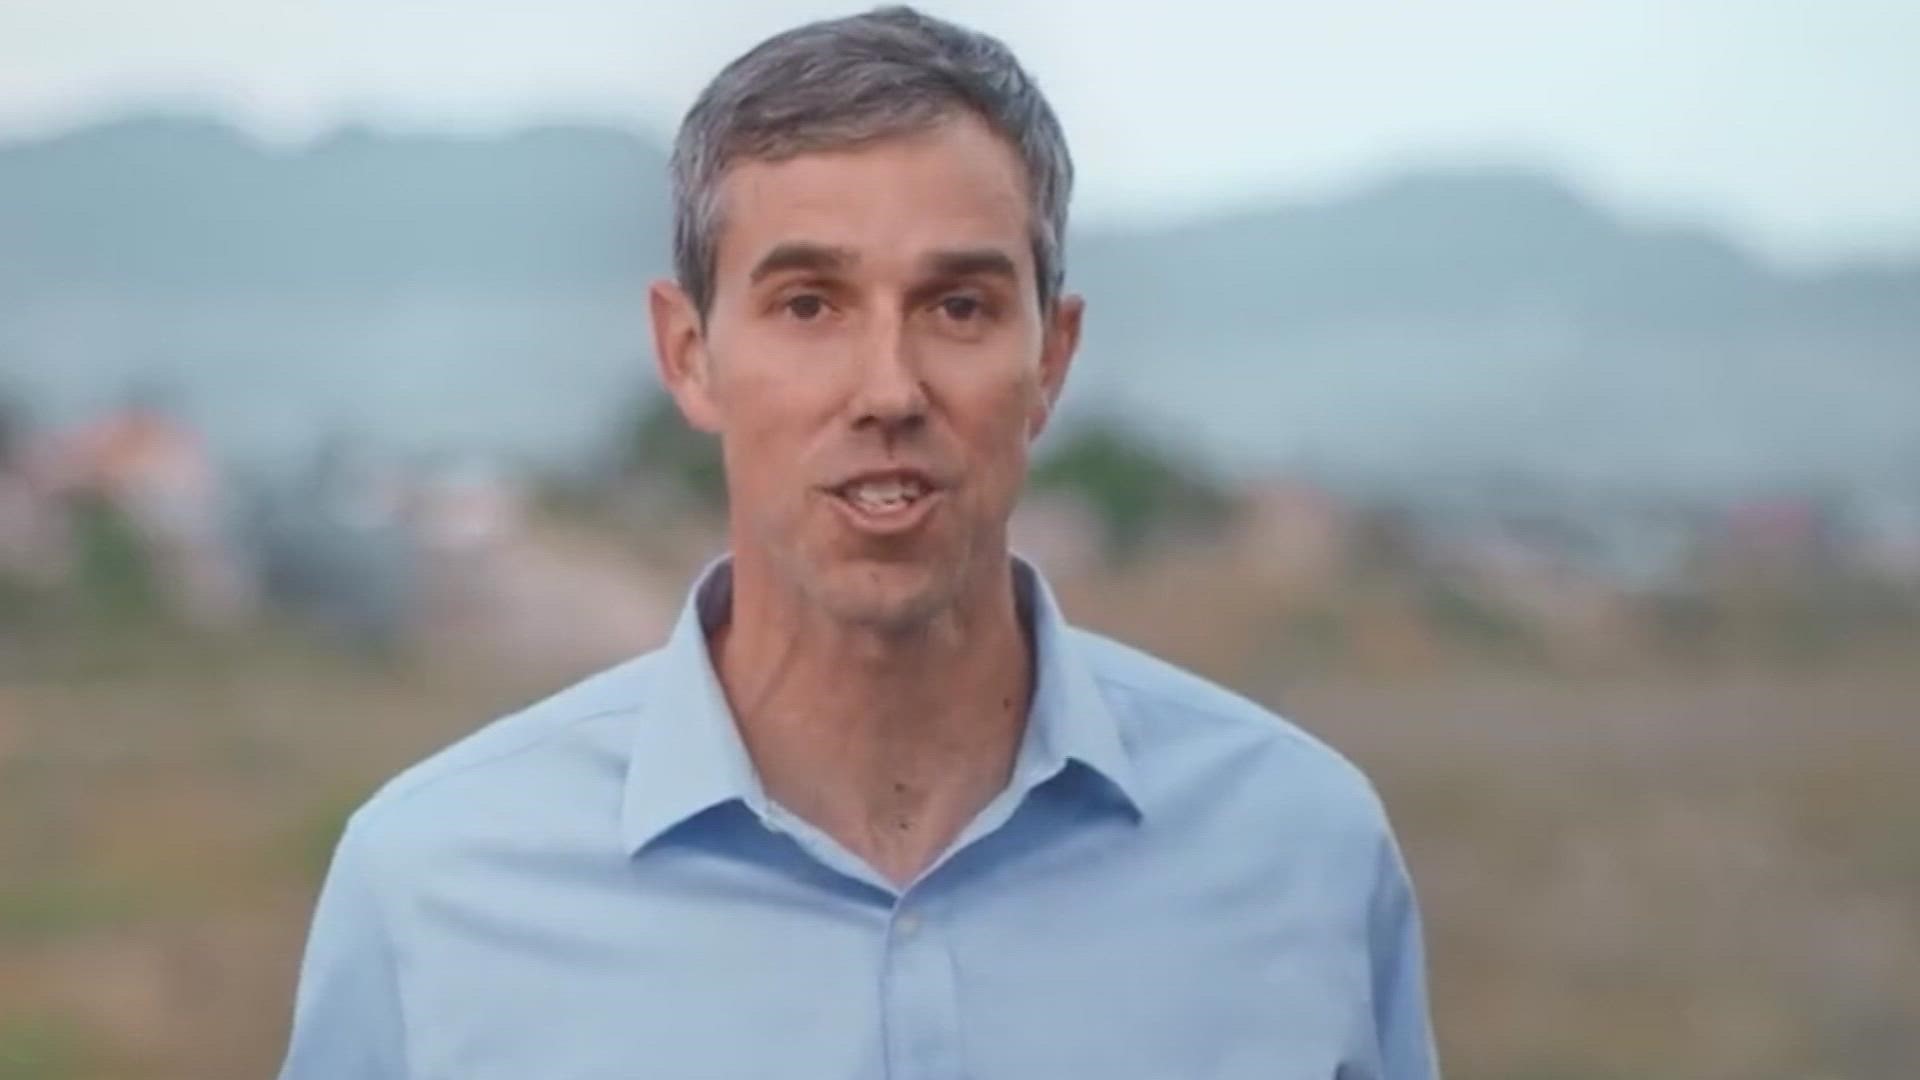 It's official! Former Congressman Beto O'Rourke is running to be the governor of Texas.